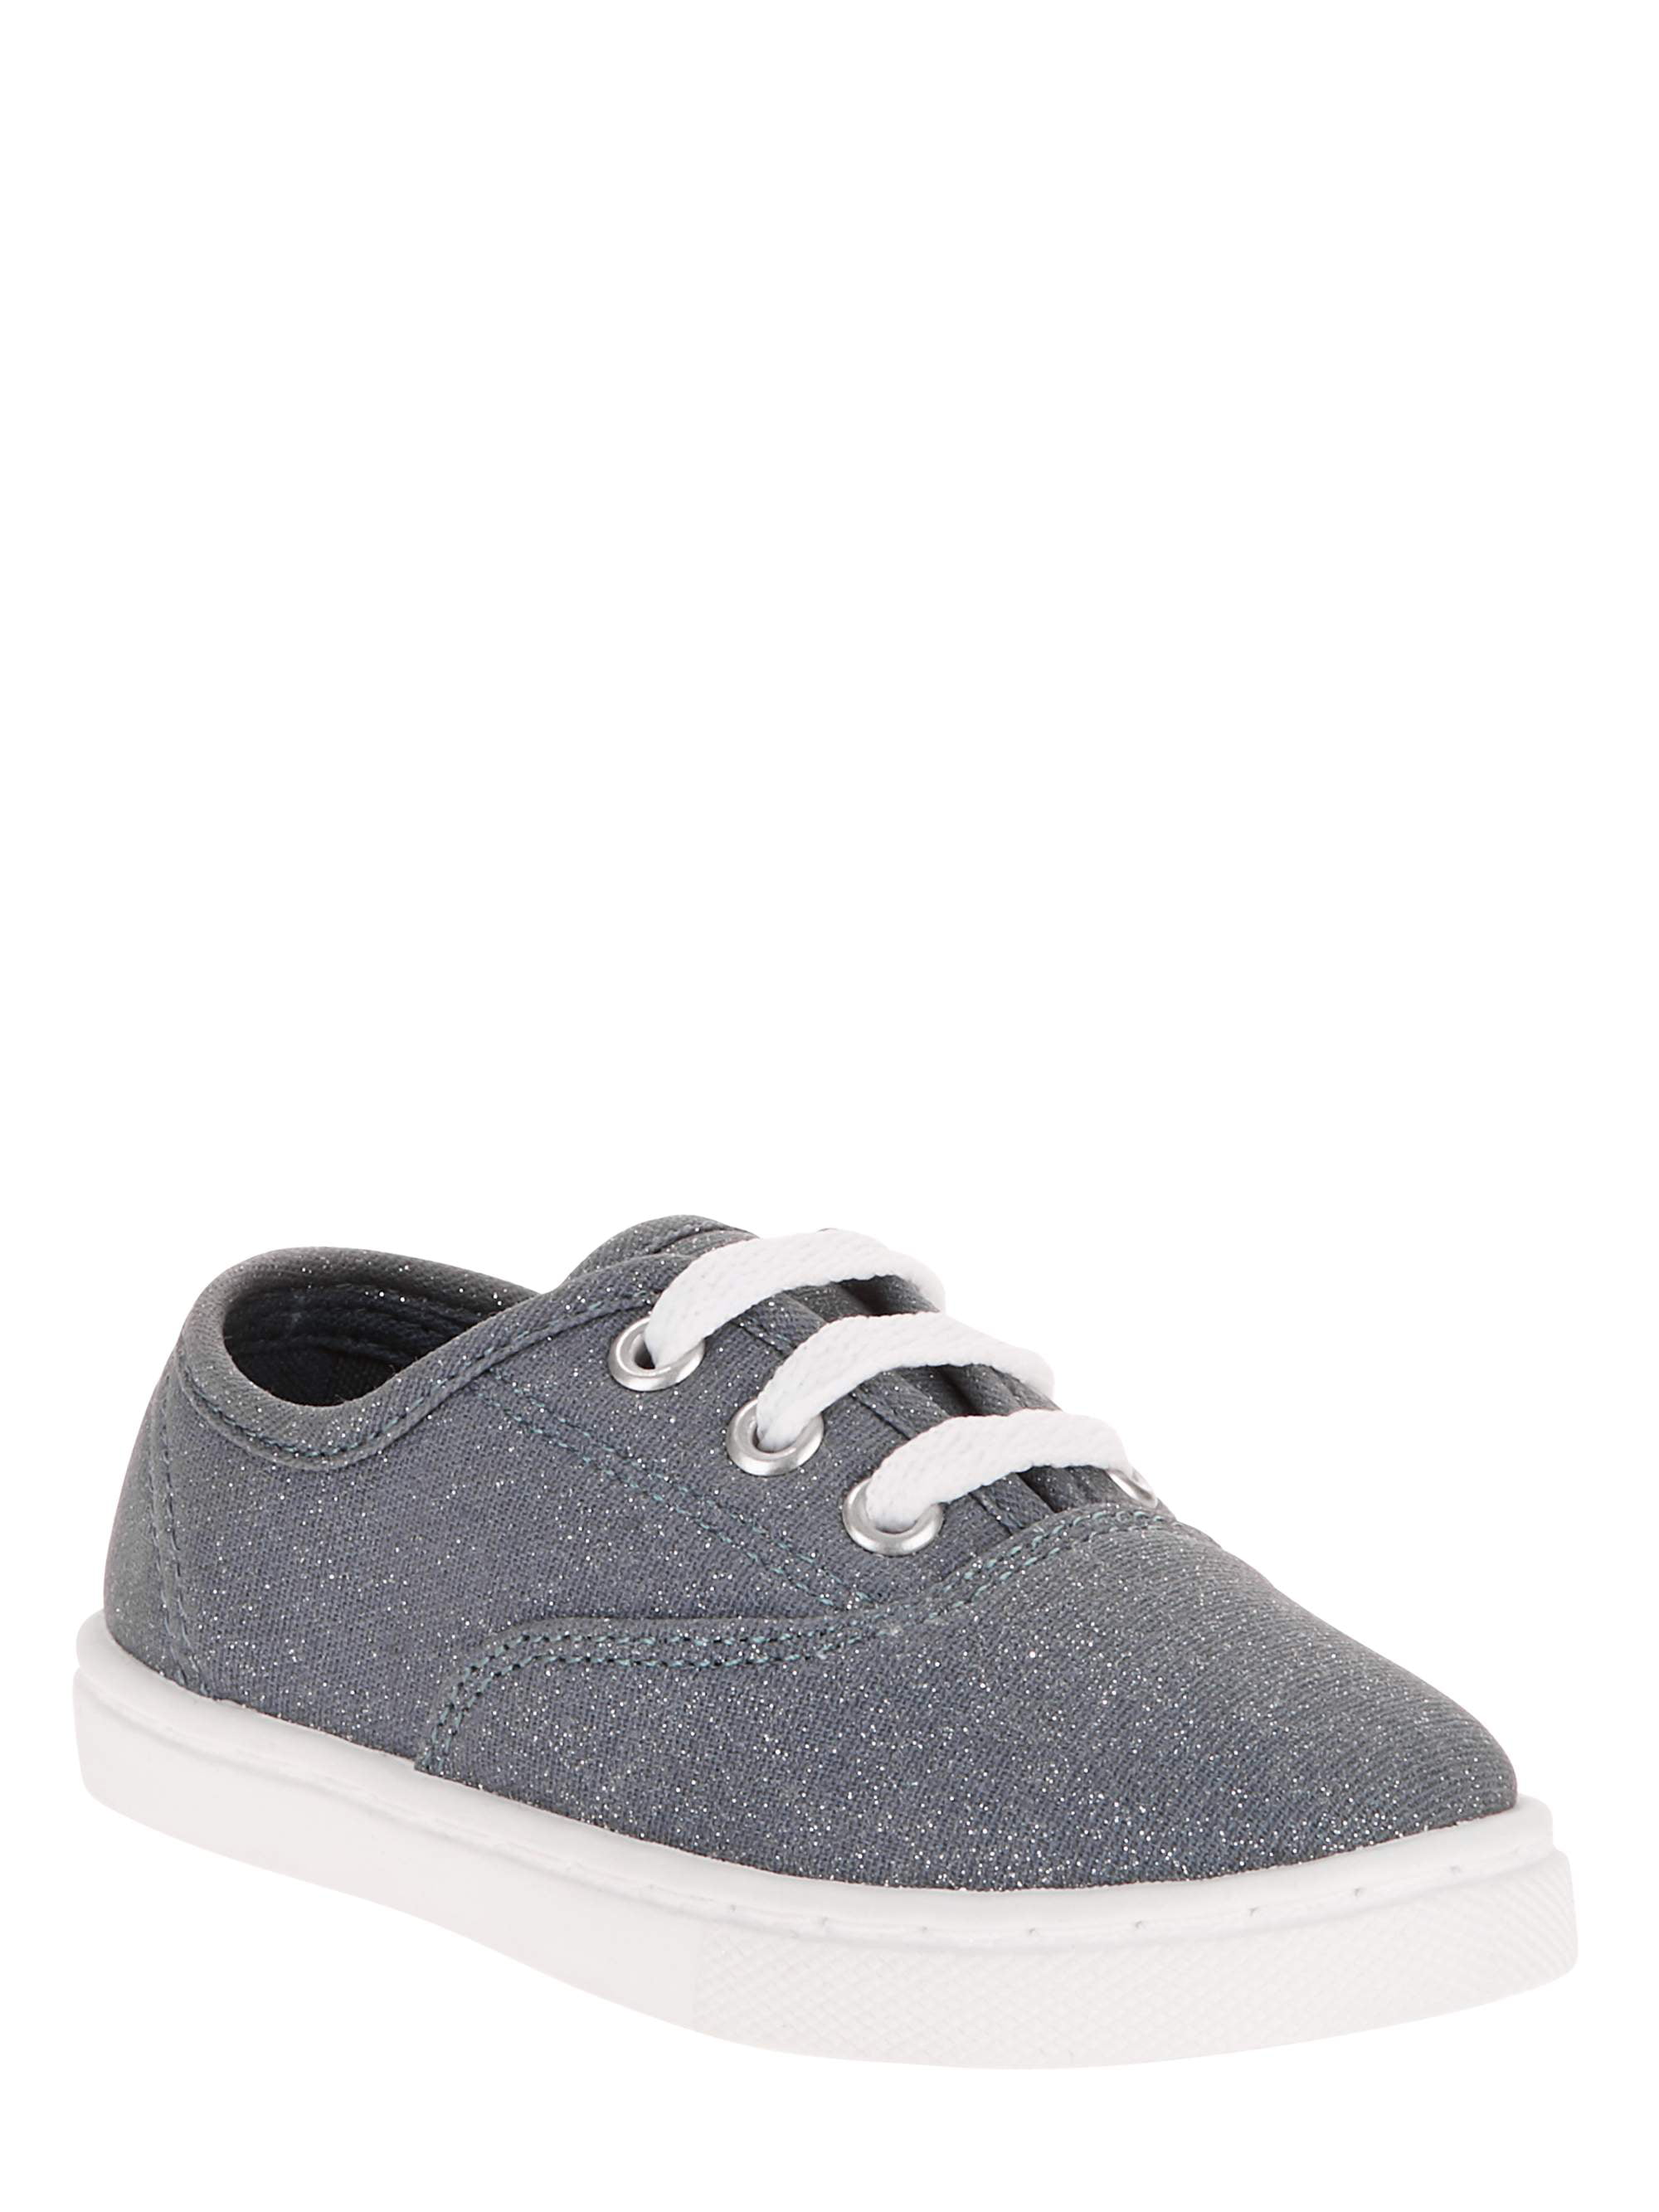 Toddler Girls' Lace-Up Canvas Shoe 